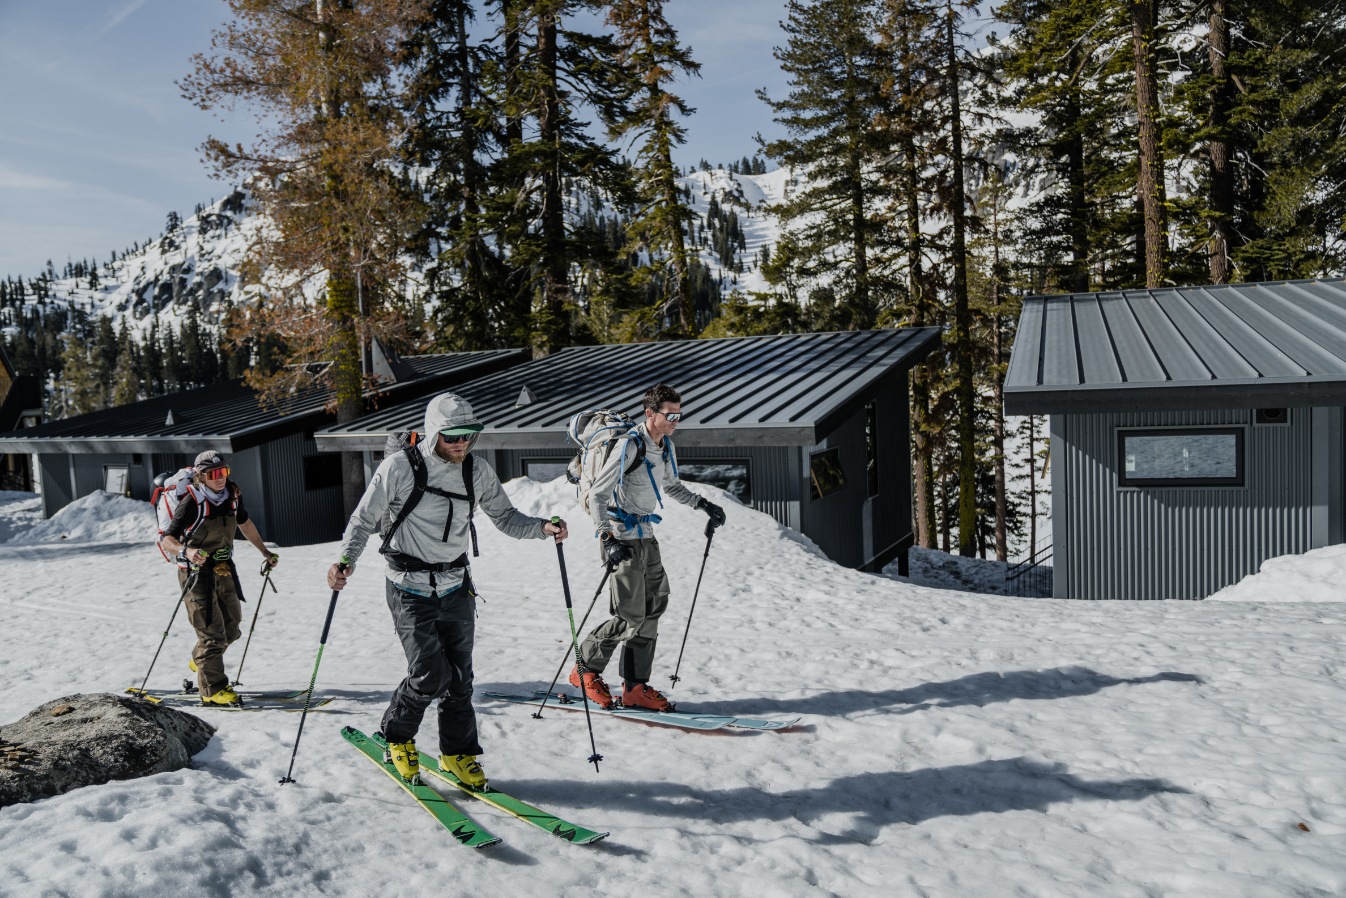 Come ski with our professional ski guides on this epic 4-day, 3-night backcountry winter hut trip based at Frog Lake in Lake Tahoe.